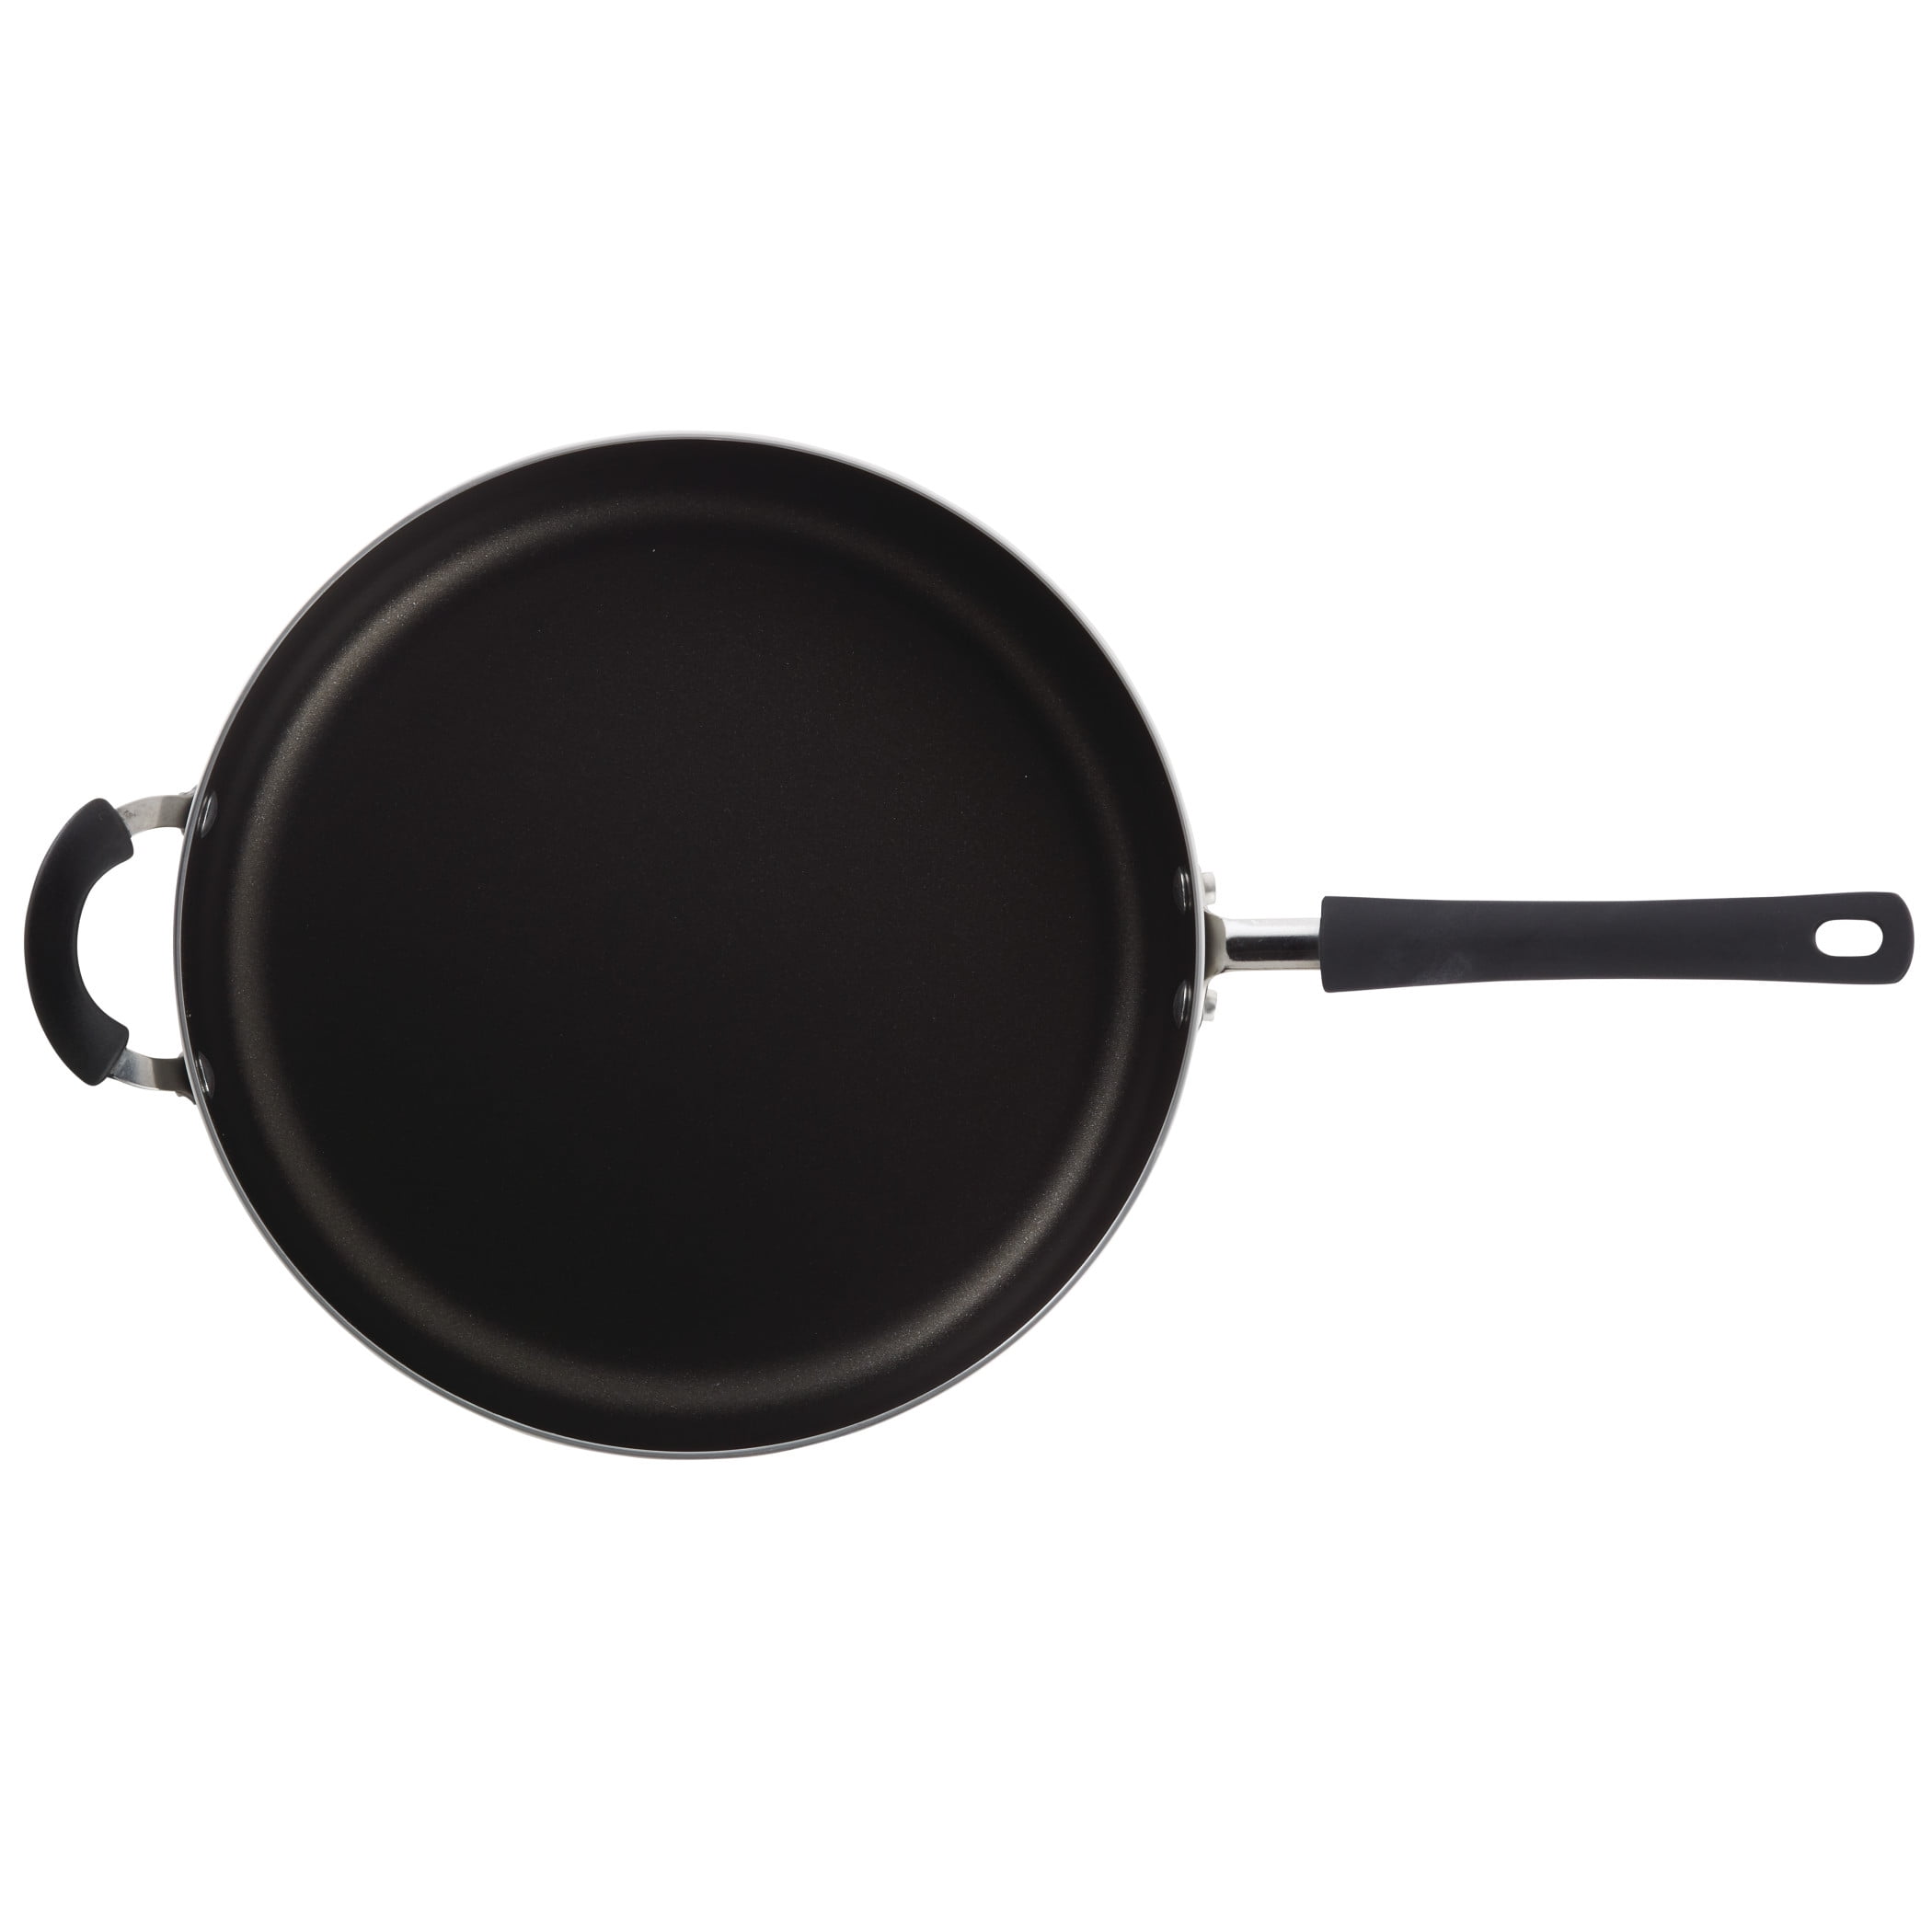  Thunder Group 14 Inch Aluminum Nonstick Fry Pan : Home